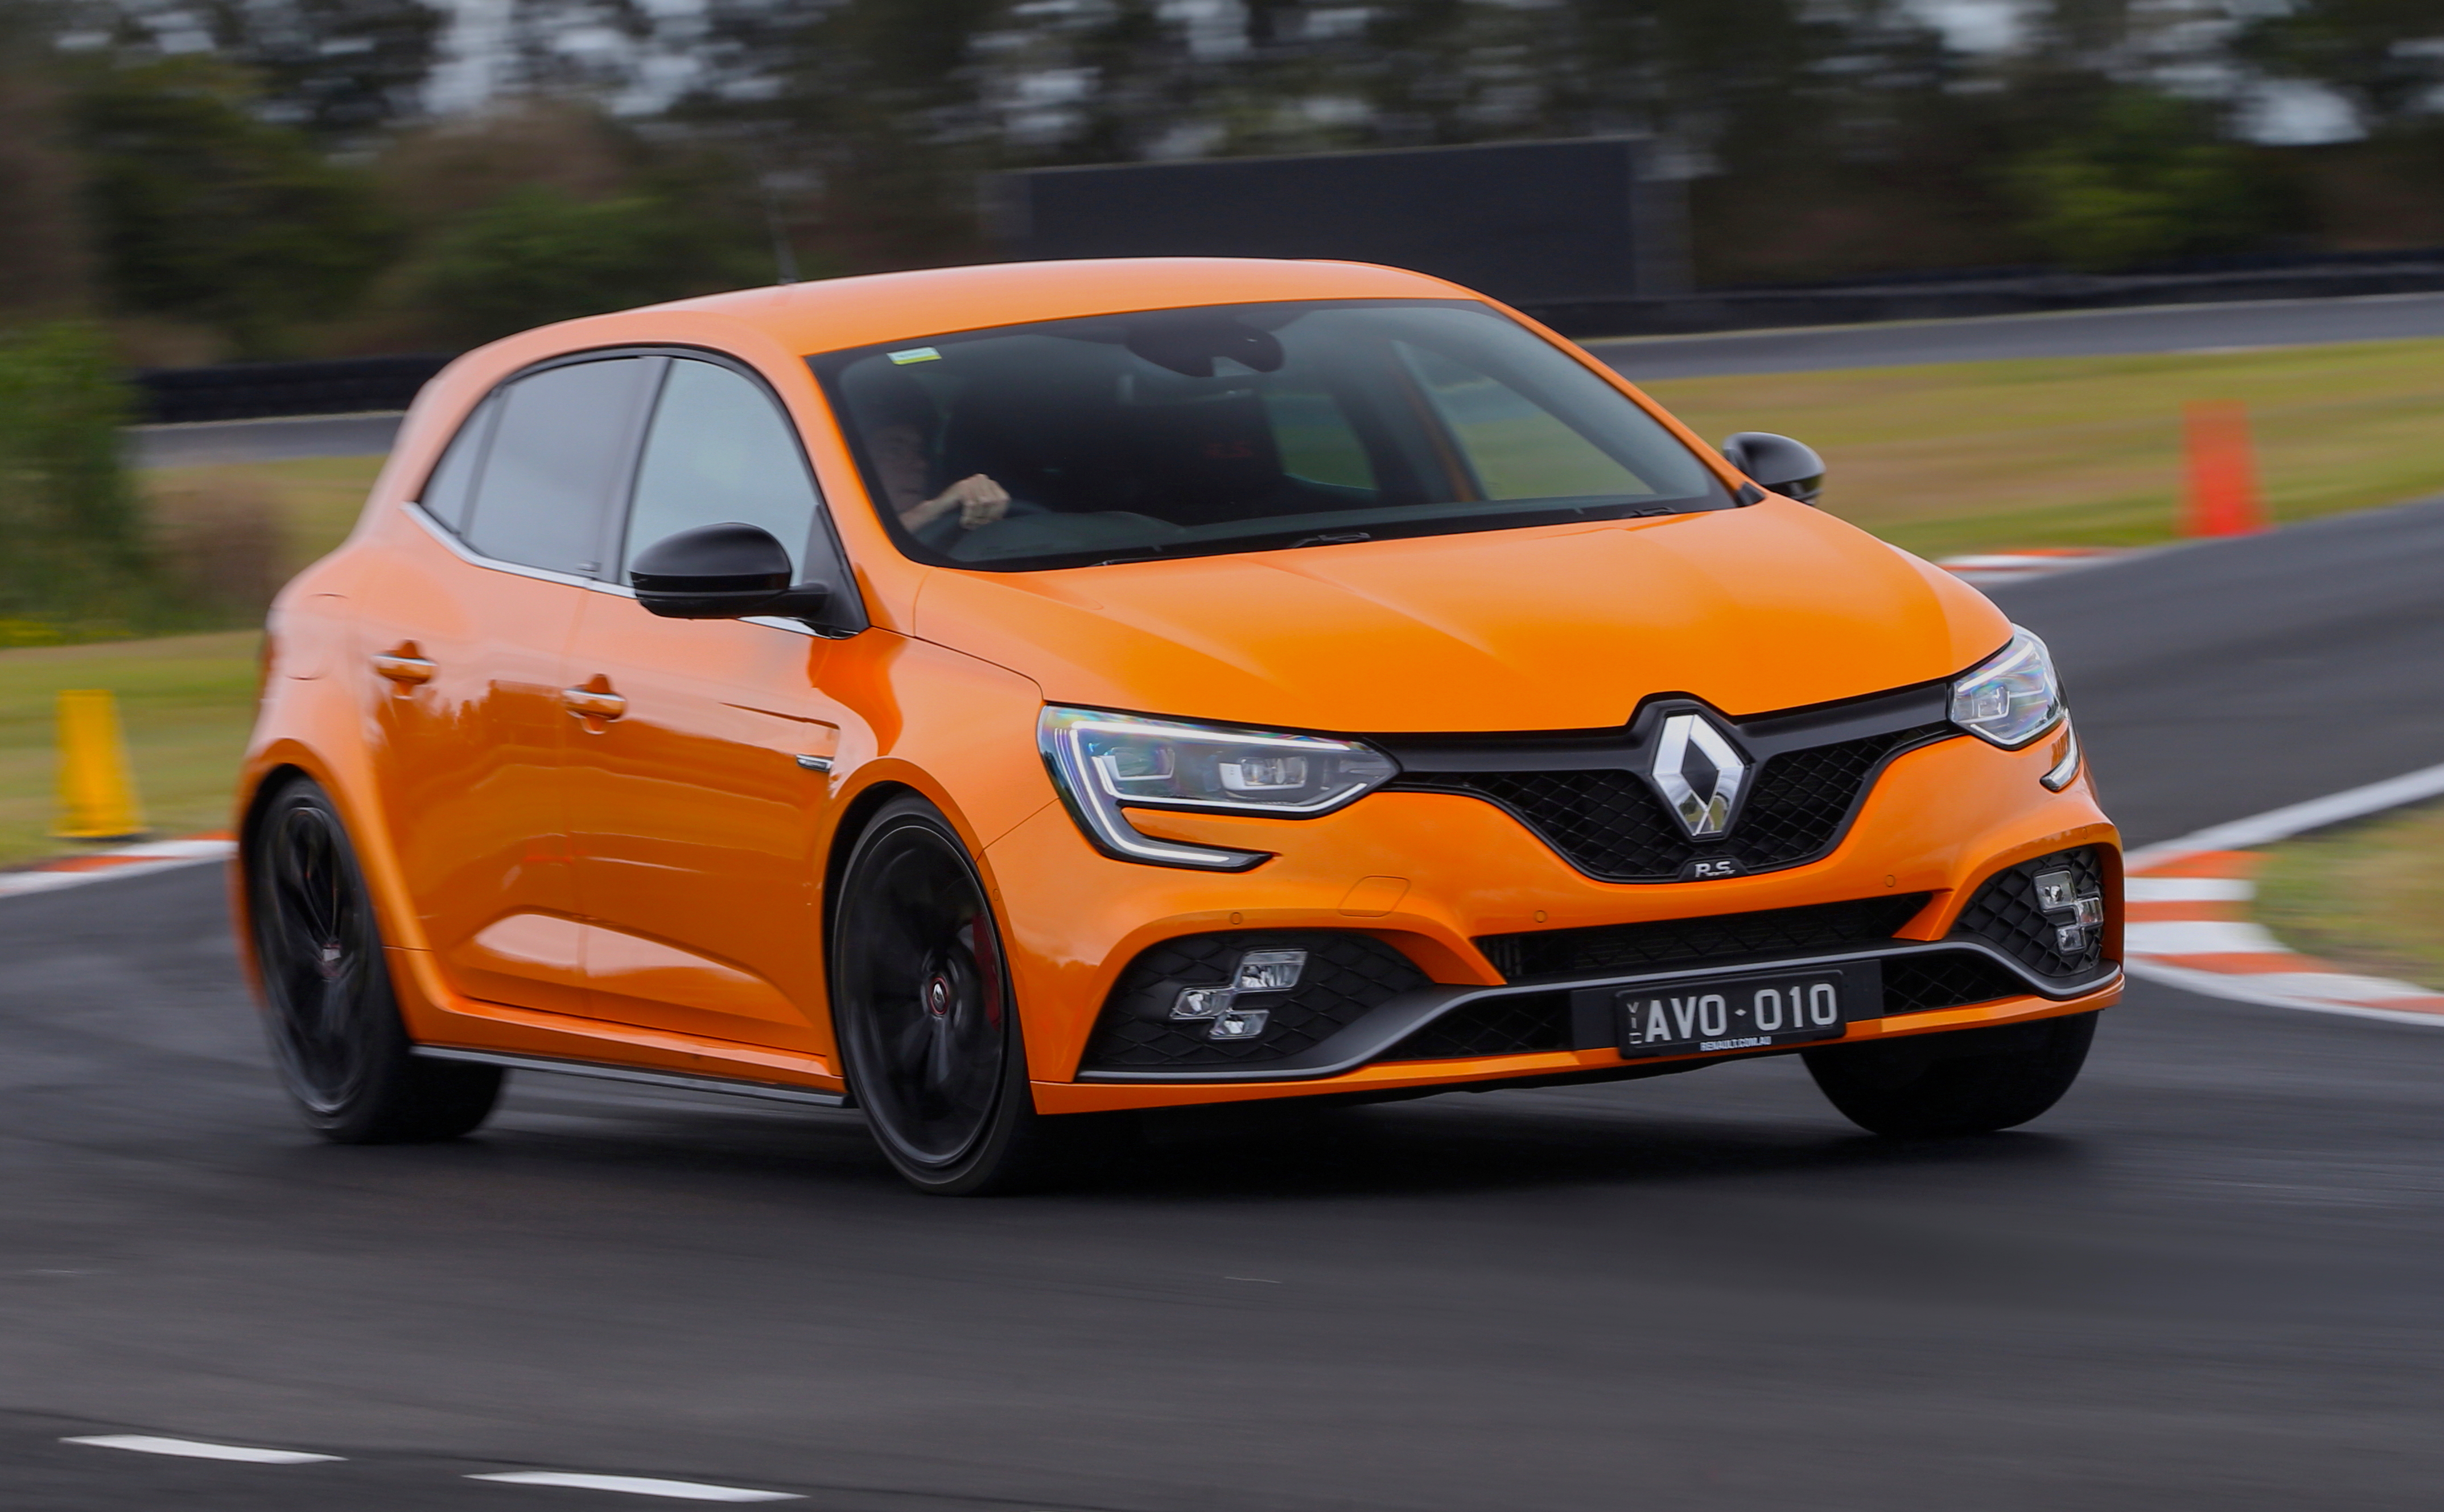 News - Renault's Long-Awaited Megane RS Touches Down In AU